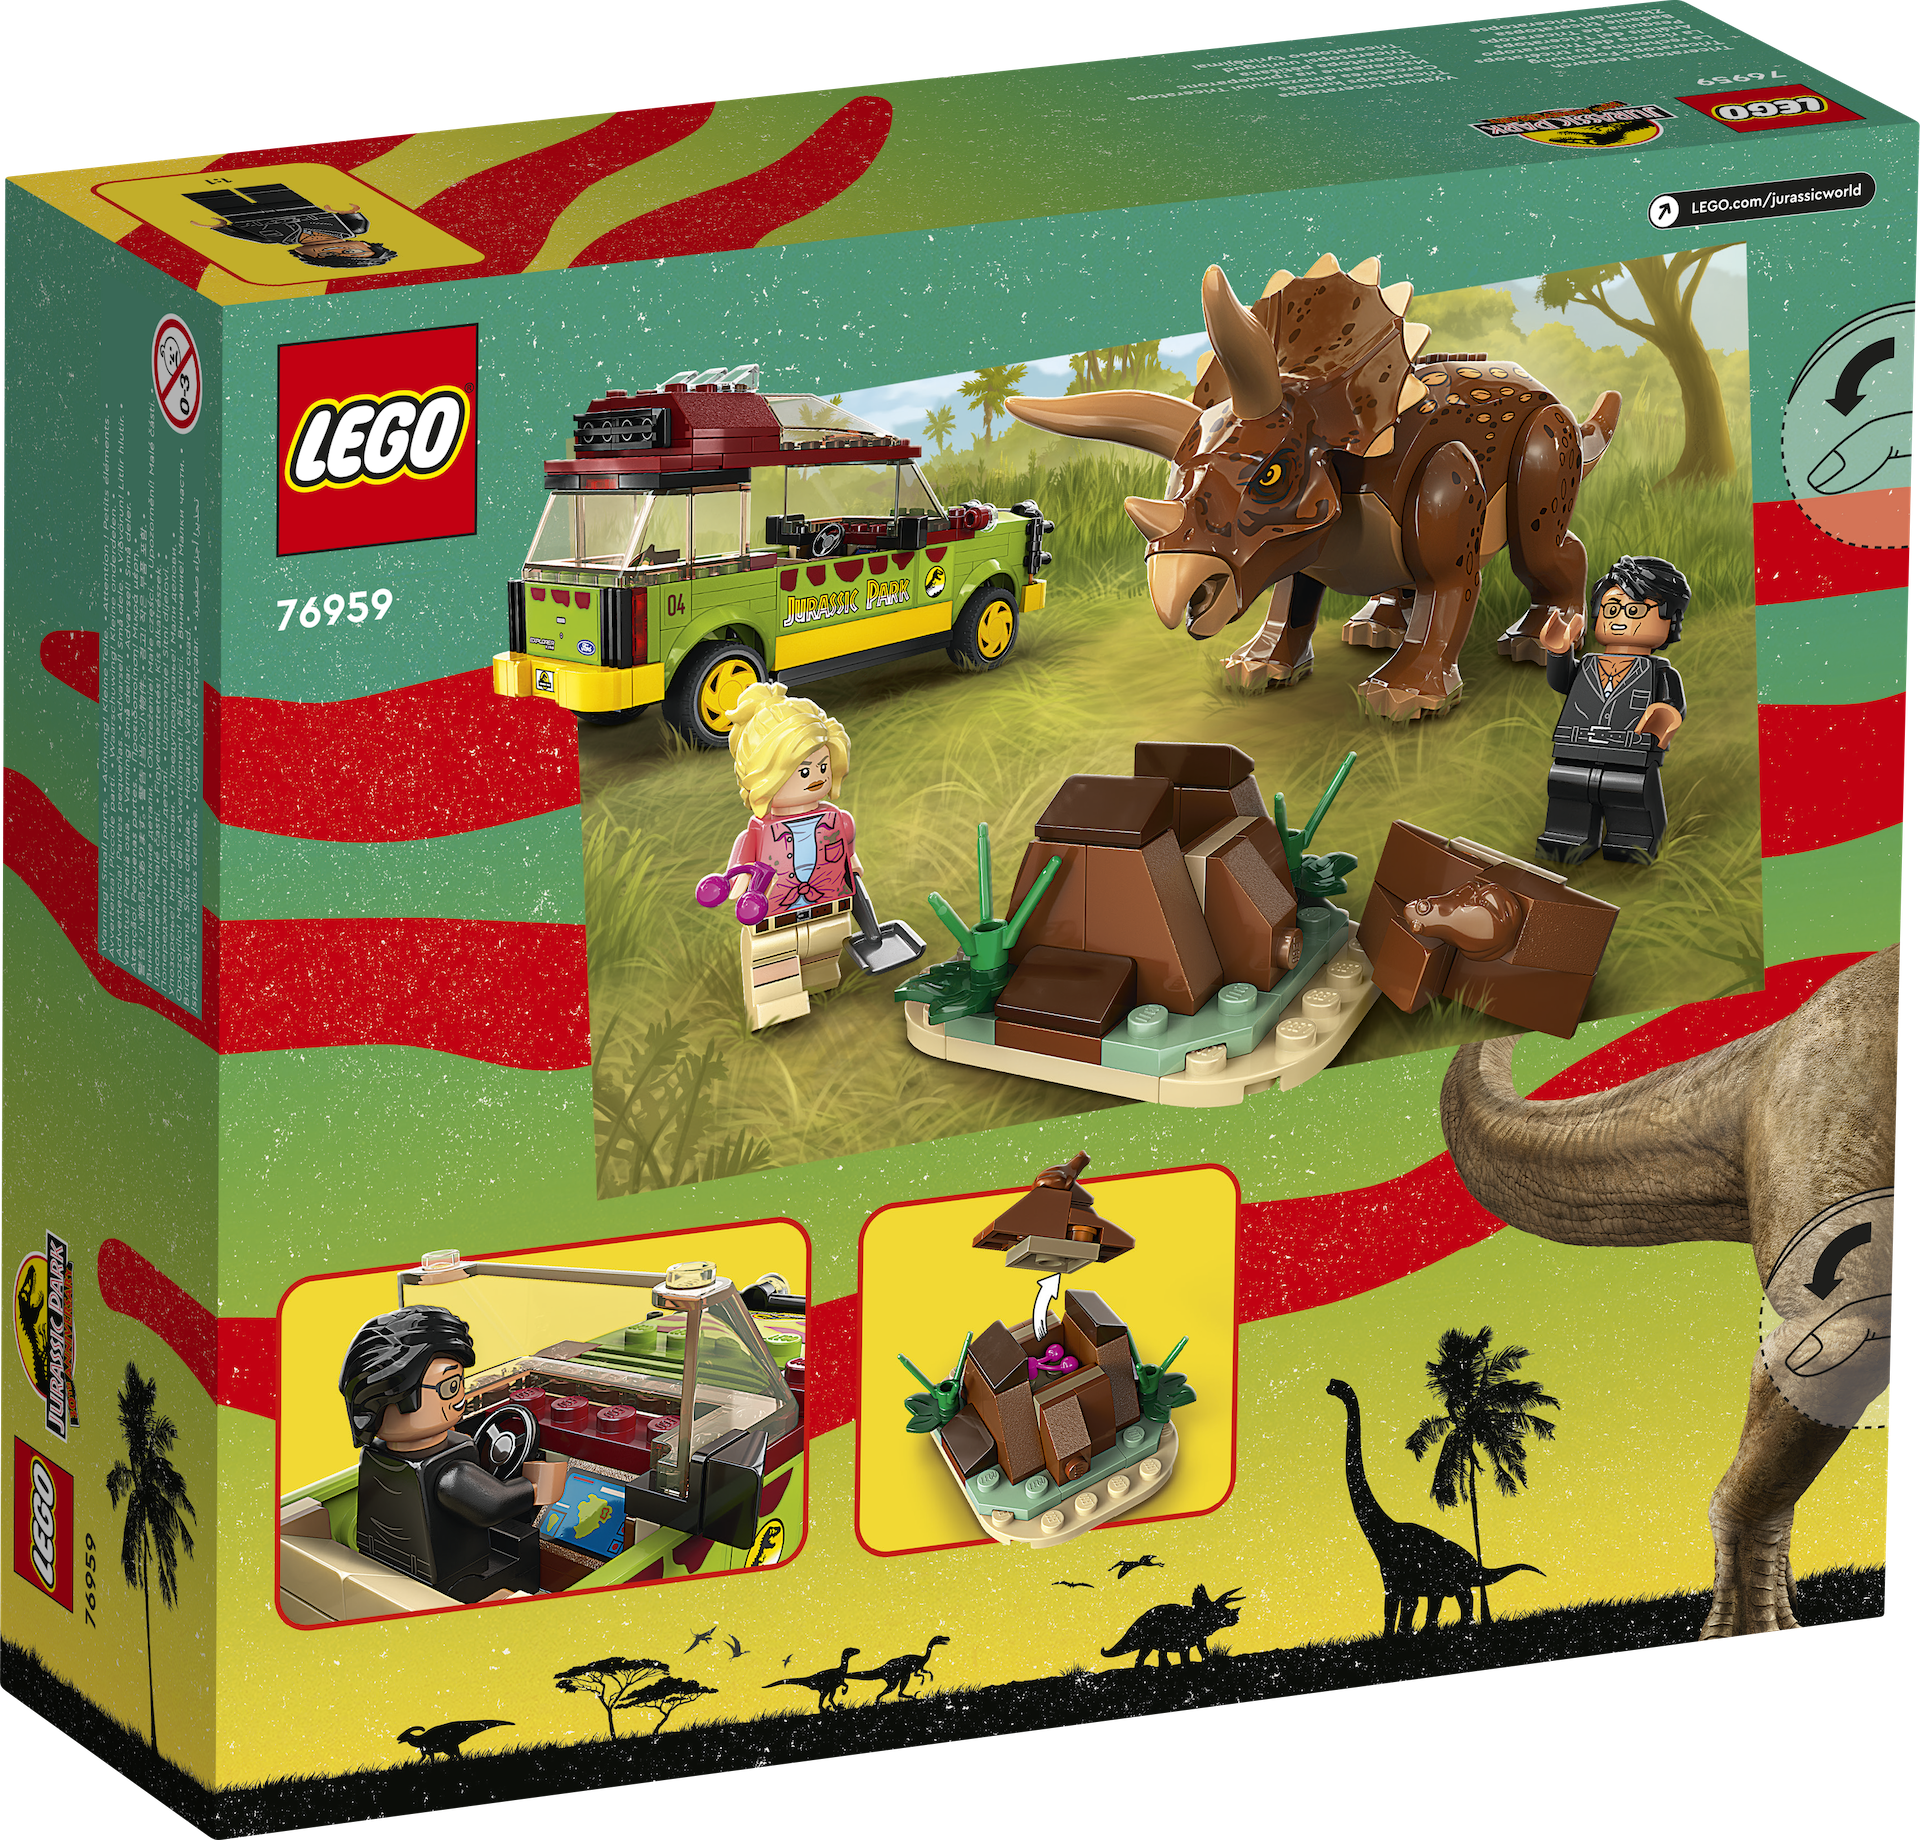 Lego's Jurassic Park playsets put dino poop in brick form - Polygon